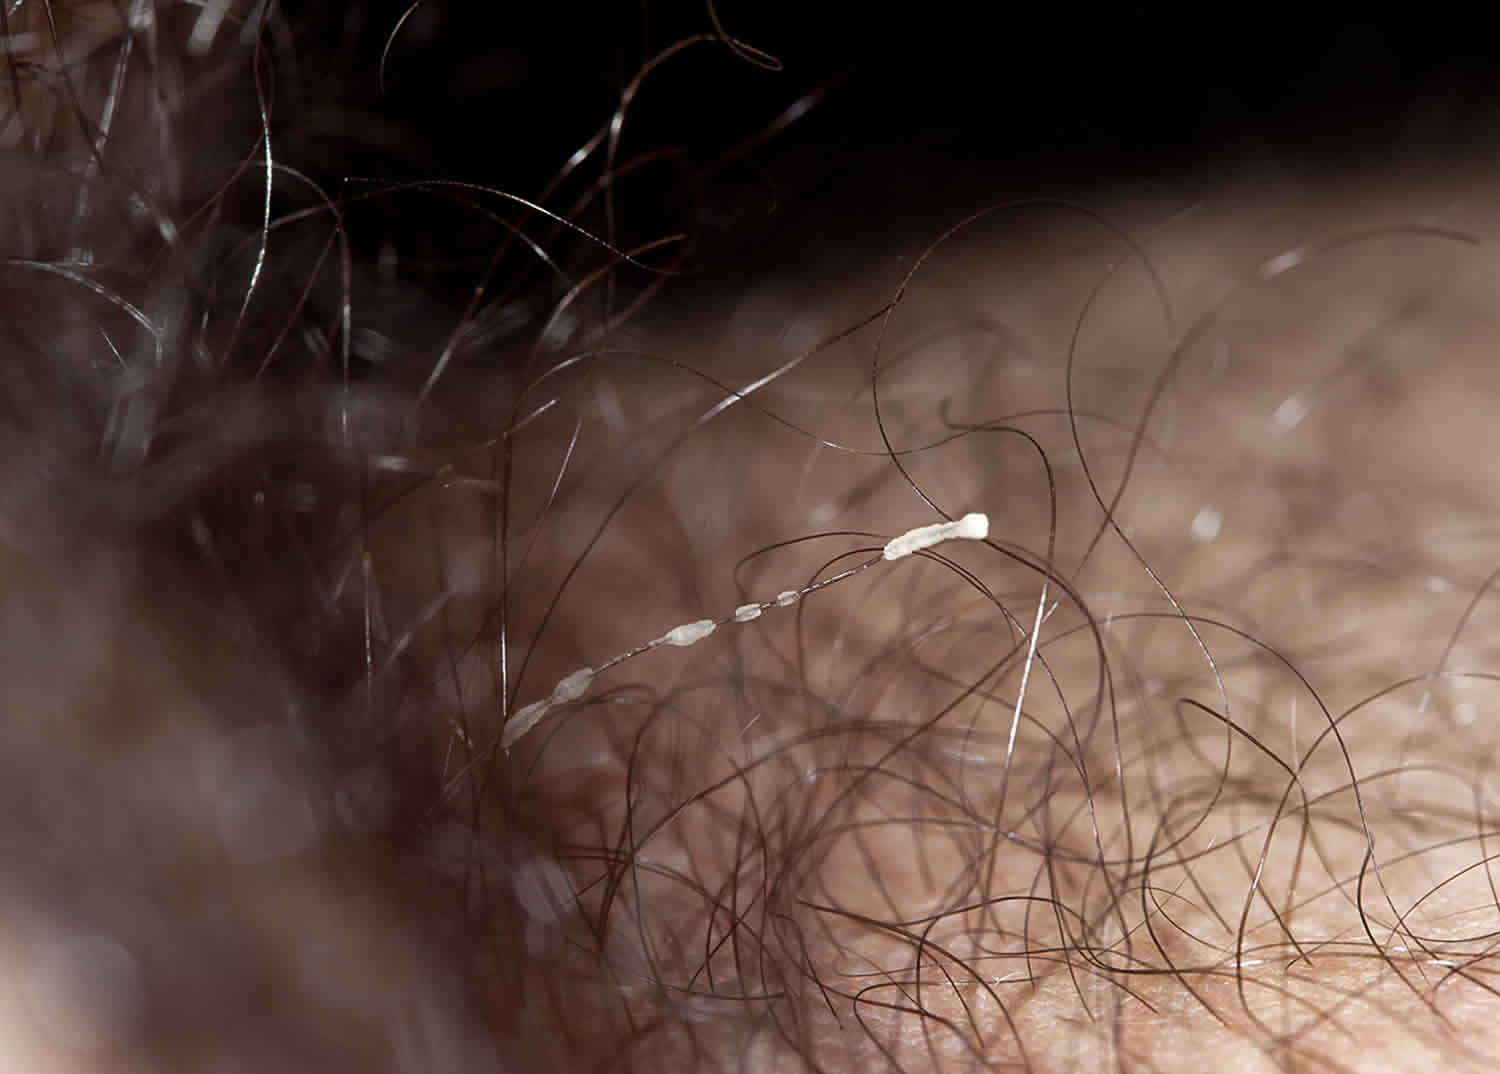 Itchy Pubic Hair: Causes and Treatment